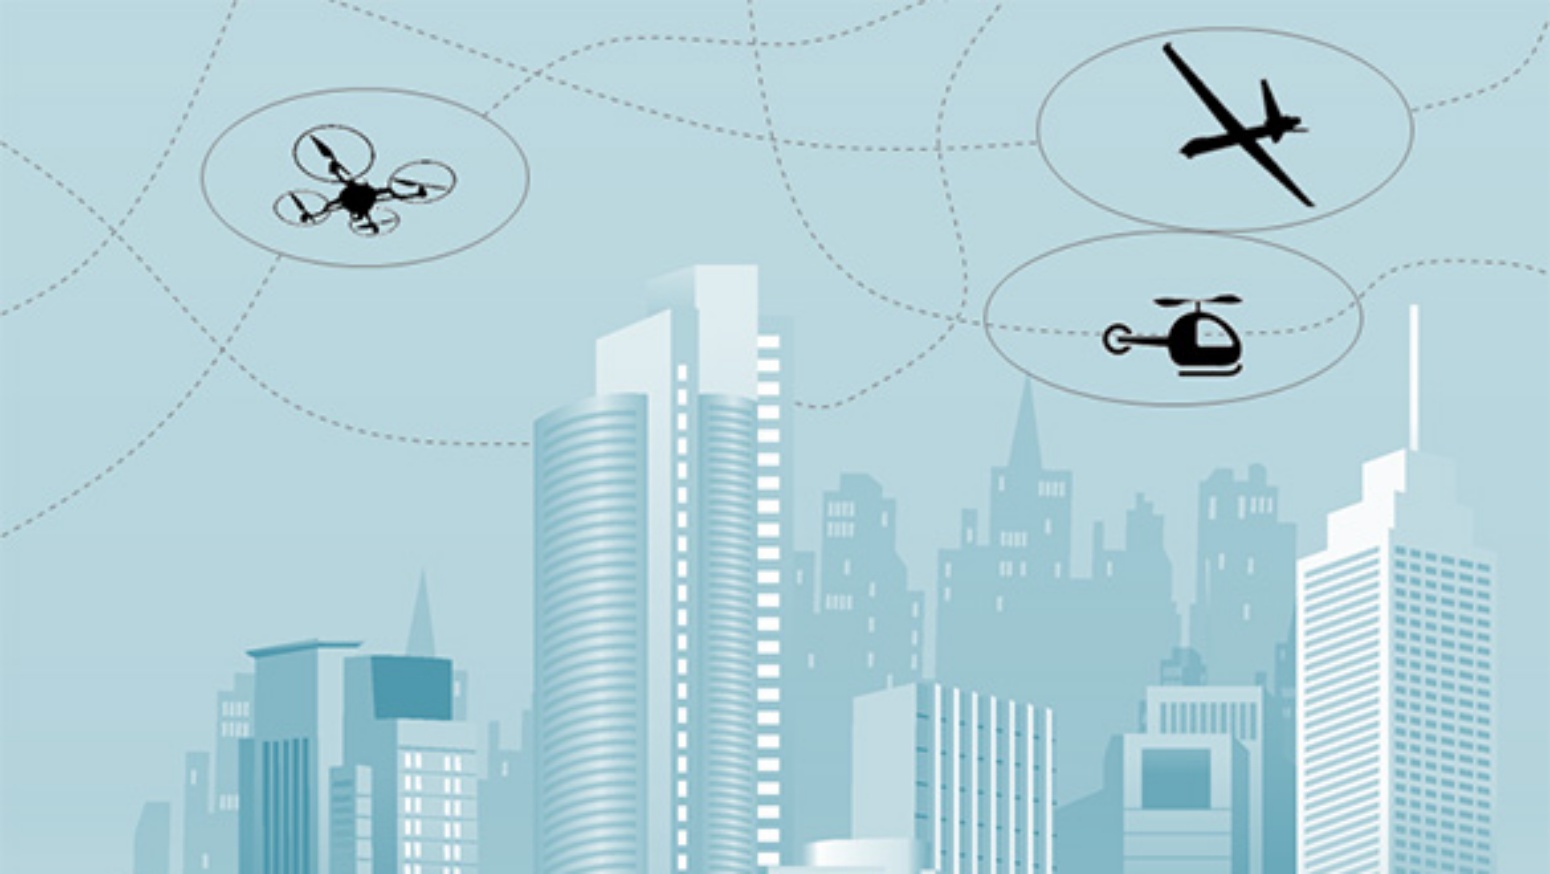 Successful test City-ATM (Unmanned Air Traffic Management) system in Germany